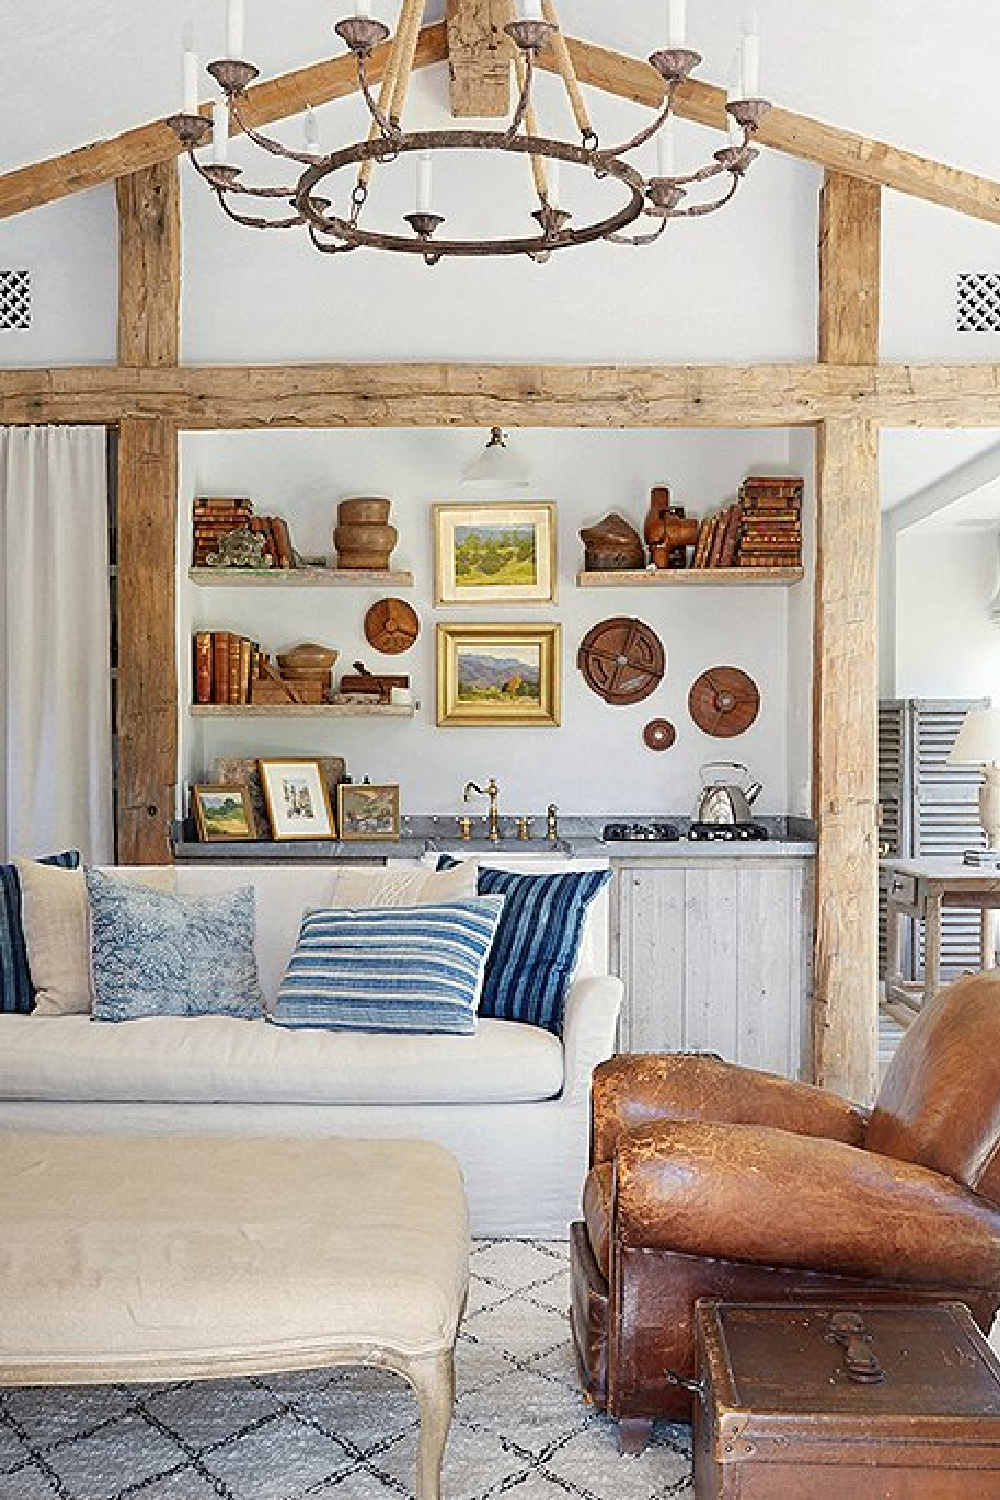 Guesthouse with rustic beams and shelves - Patina Farm (Brooke Giannetti) European country farmhouse in Ojai. #patinafarm #vintagemodern #modernrustic #modernfarmhouse